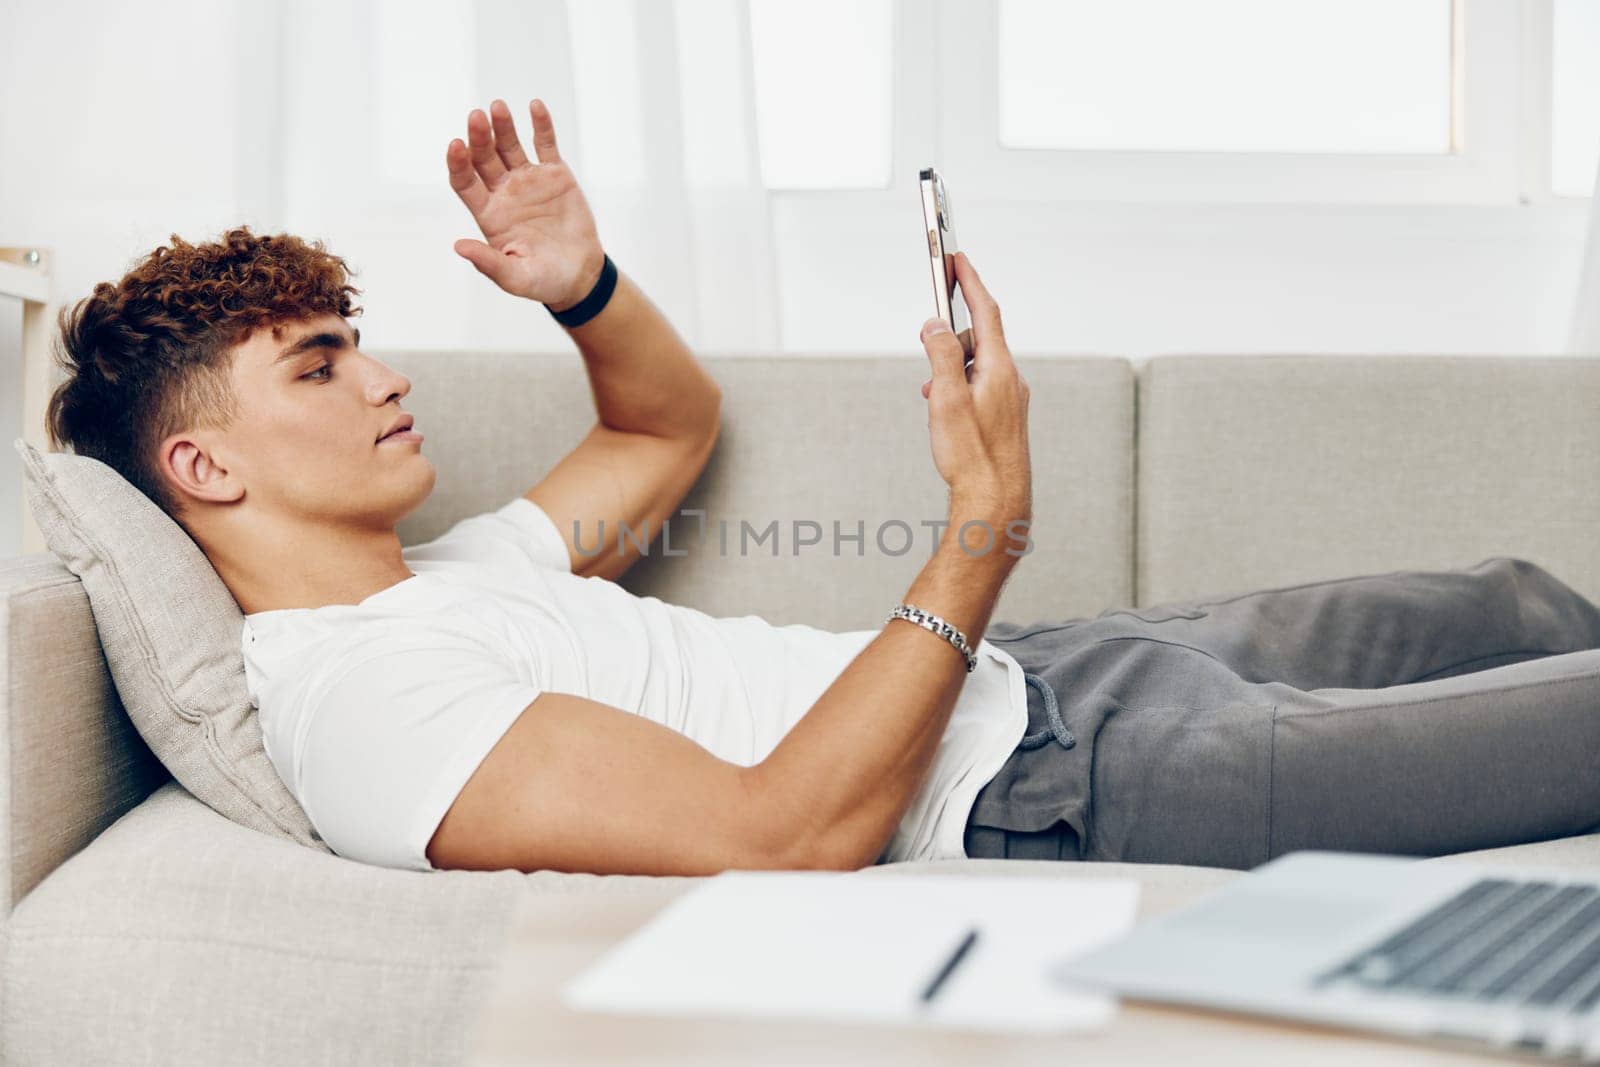 man interior sitting using laptop lifestyle phone couch person teenager home mockup internet male holding text message online technology